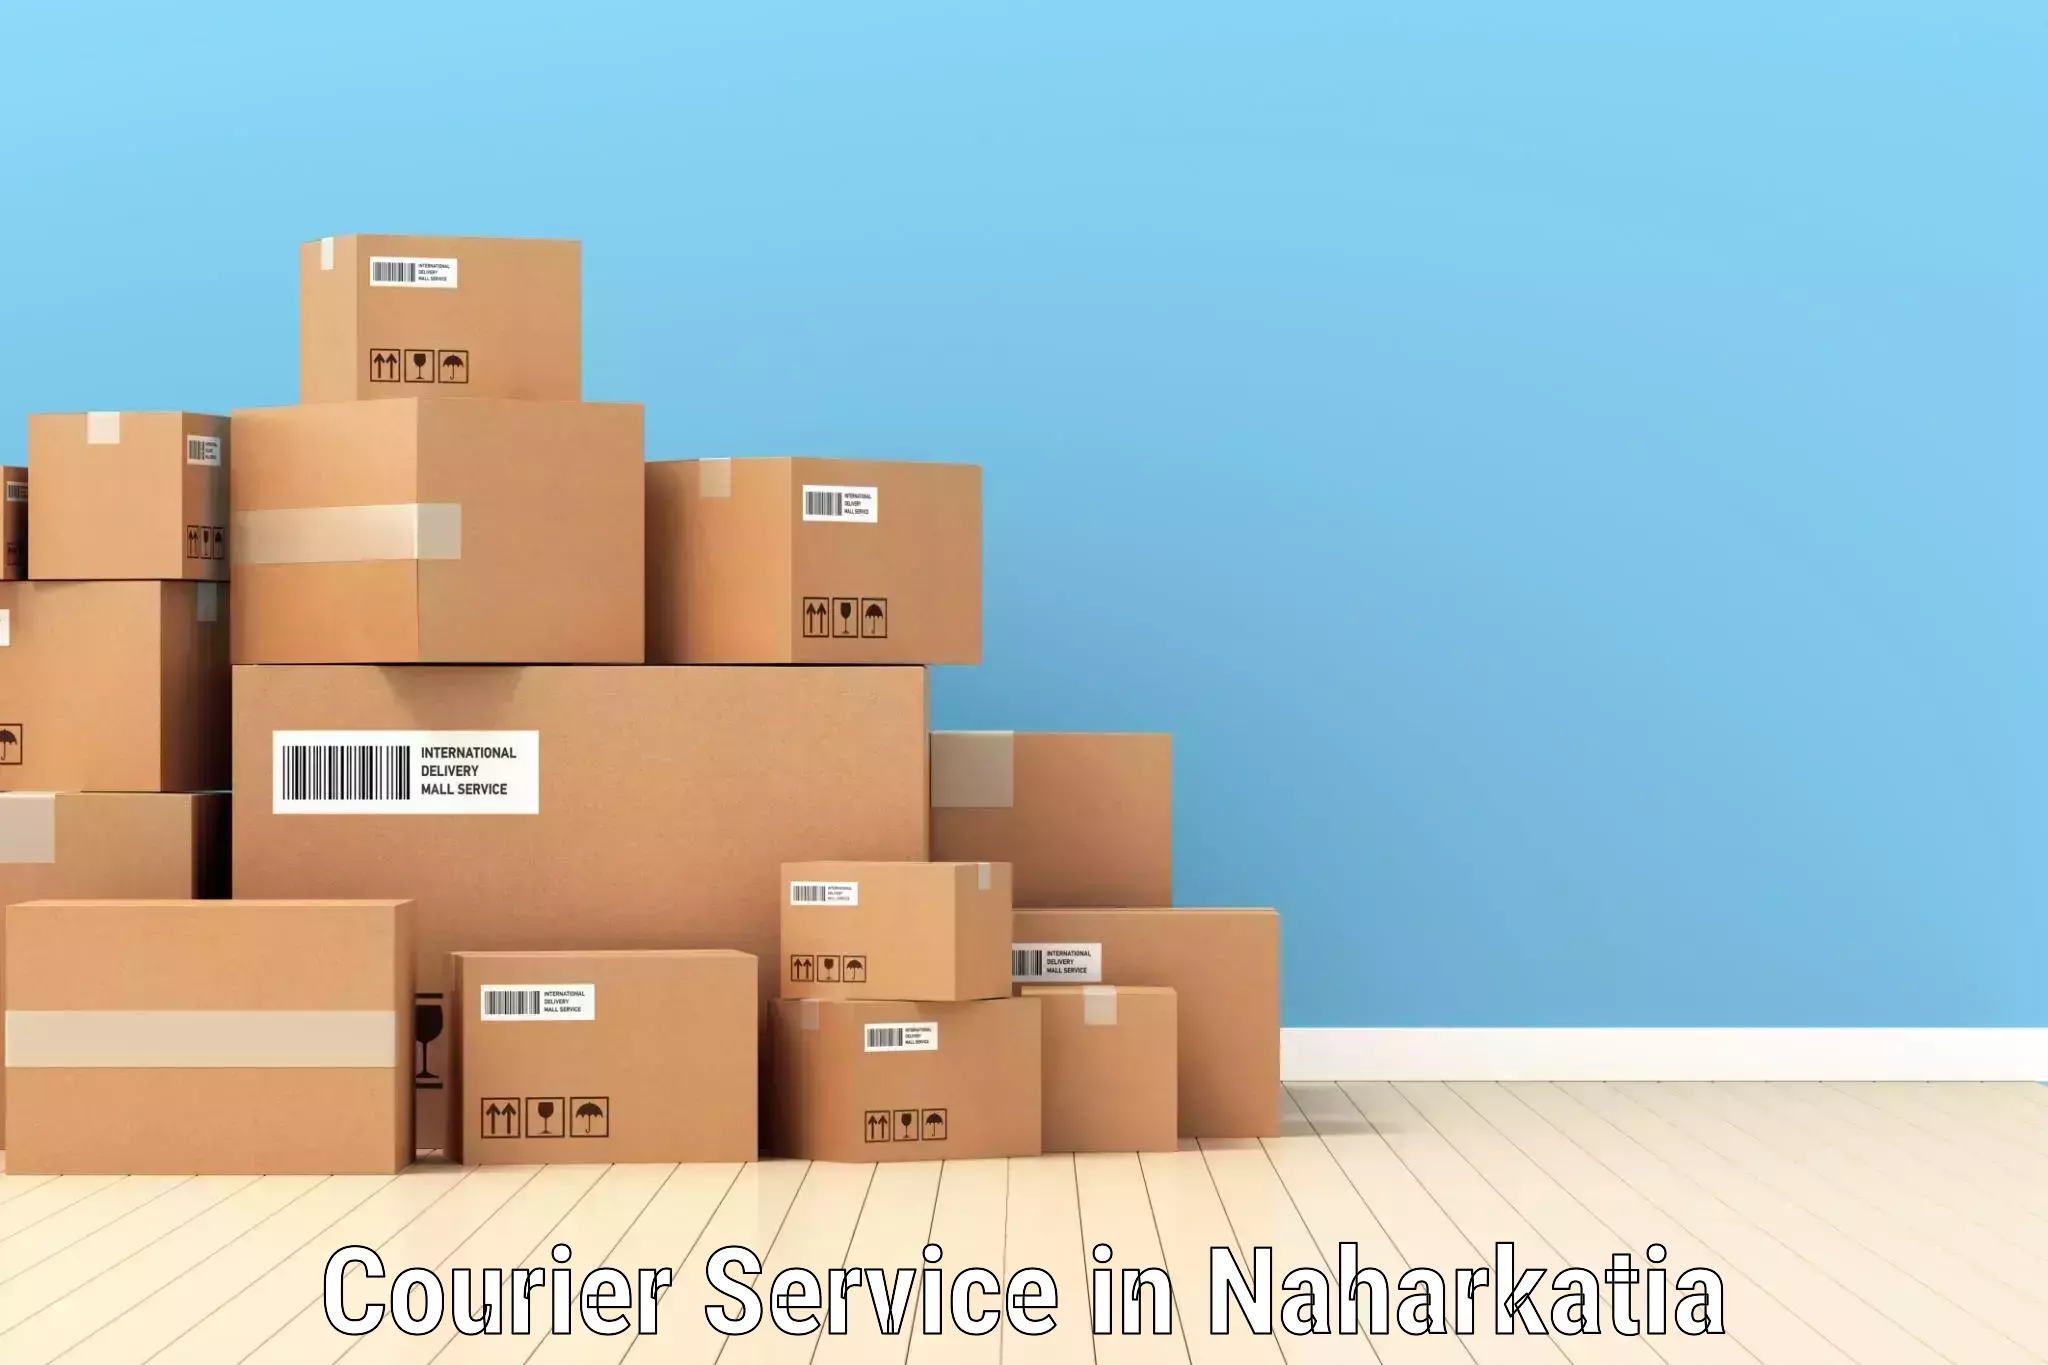 Overnight delivery services in Naharkatia